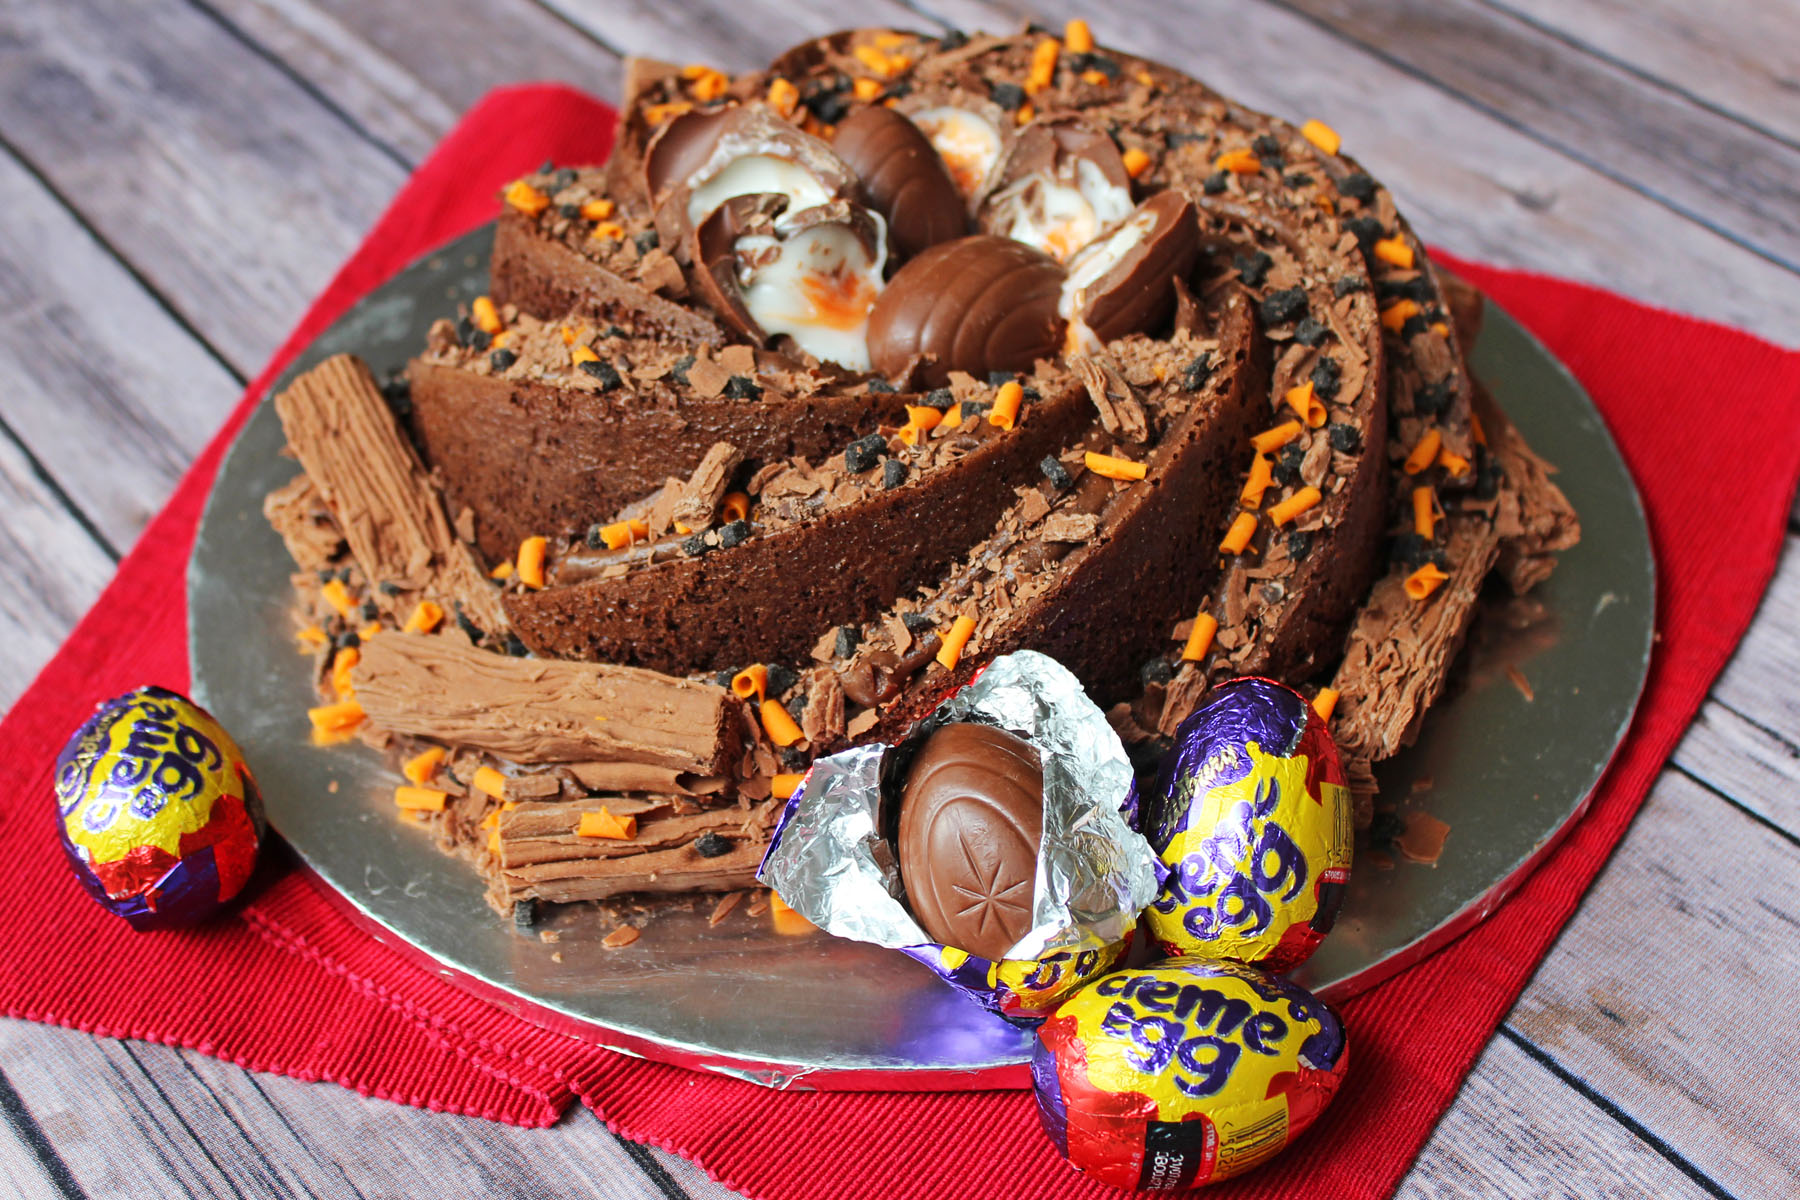 Creme Egg lovers will go crazy for this eggstravagent Creme Egg Bundt Cake. Recipe on Supper in the Suburbs